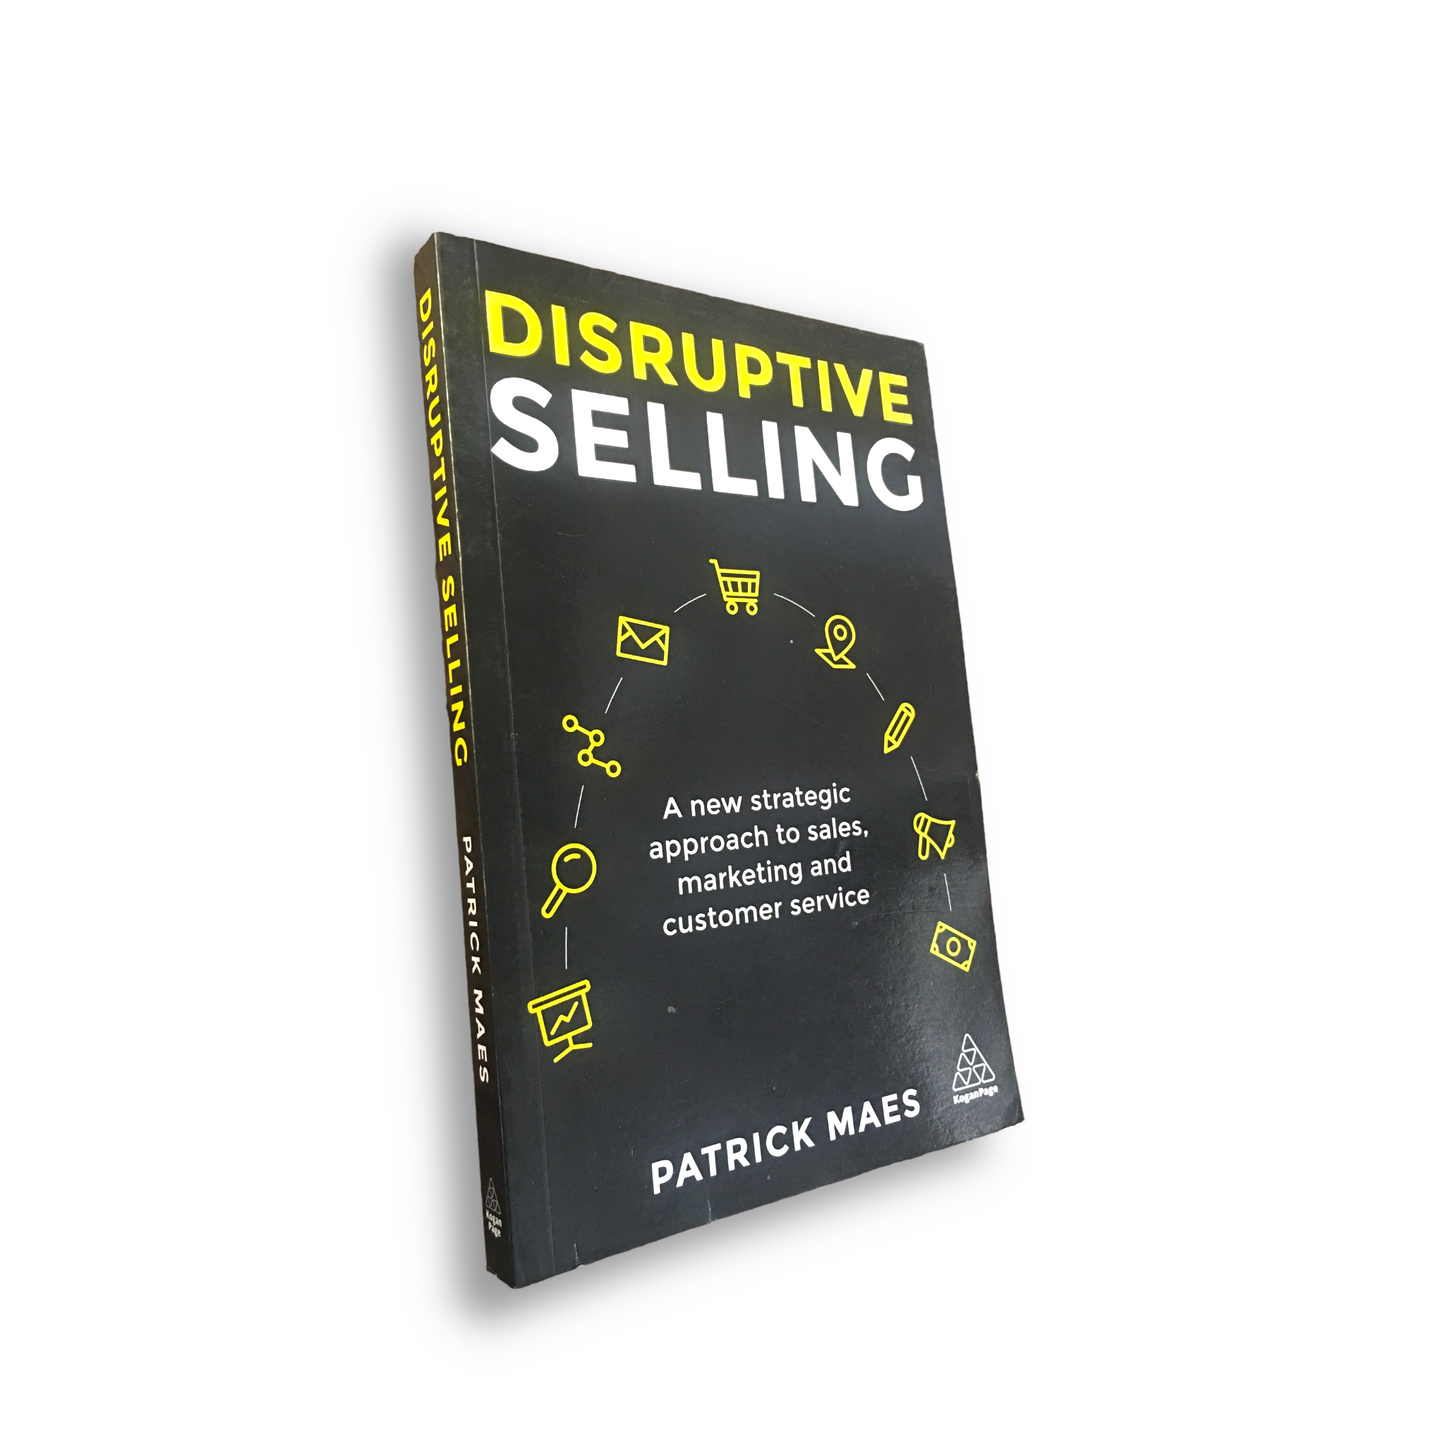 DISRUPTIVE SELLING by Patrick Maes